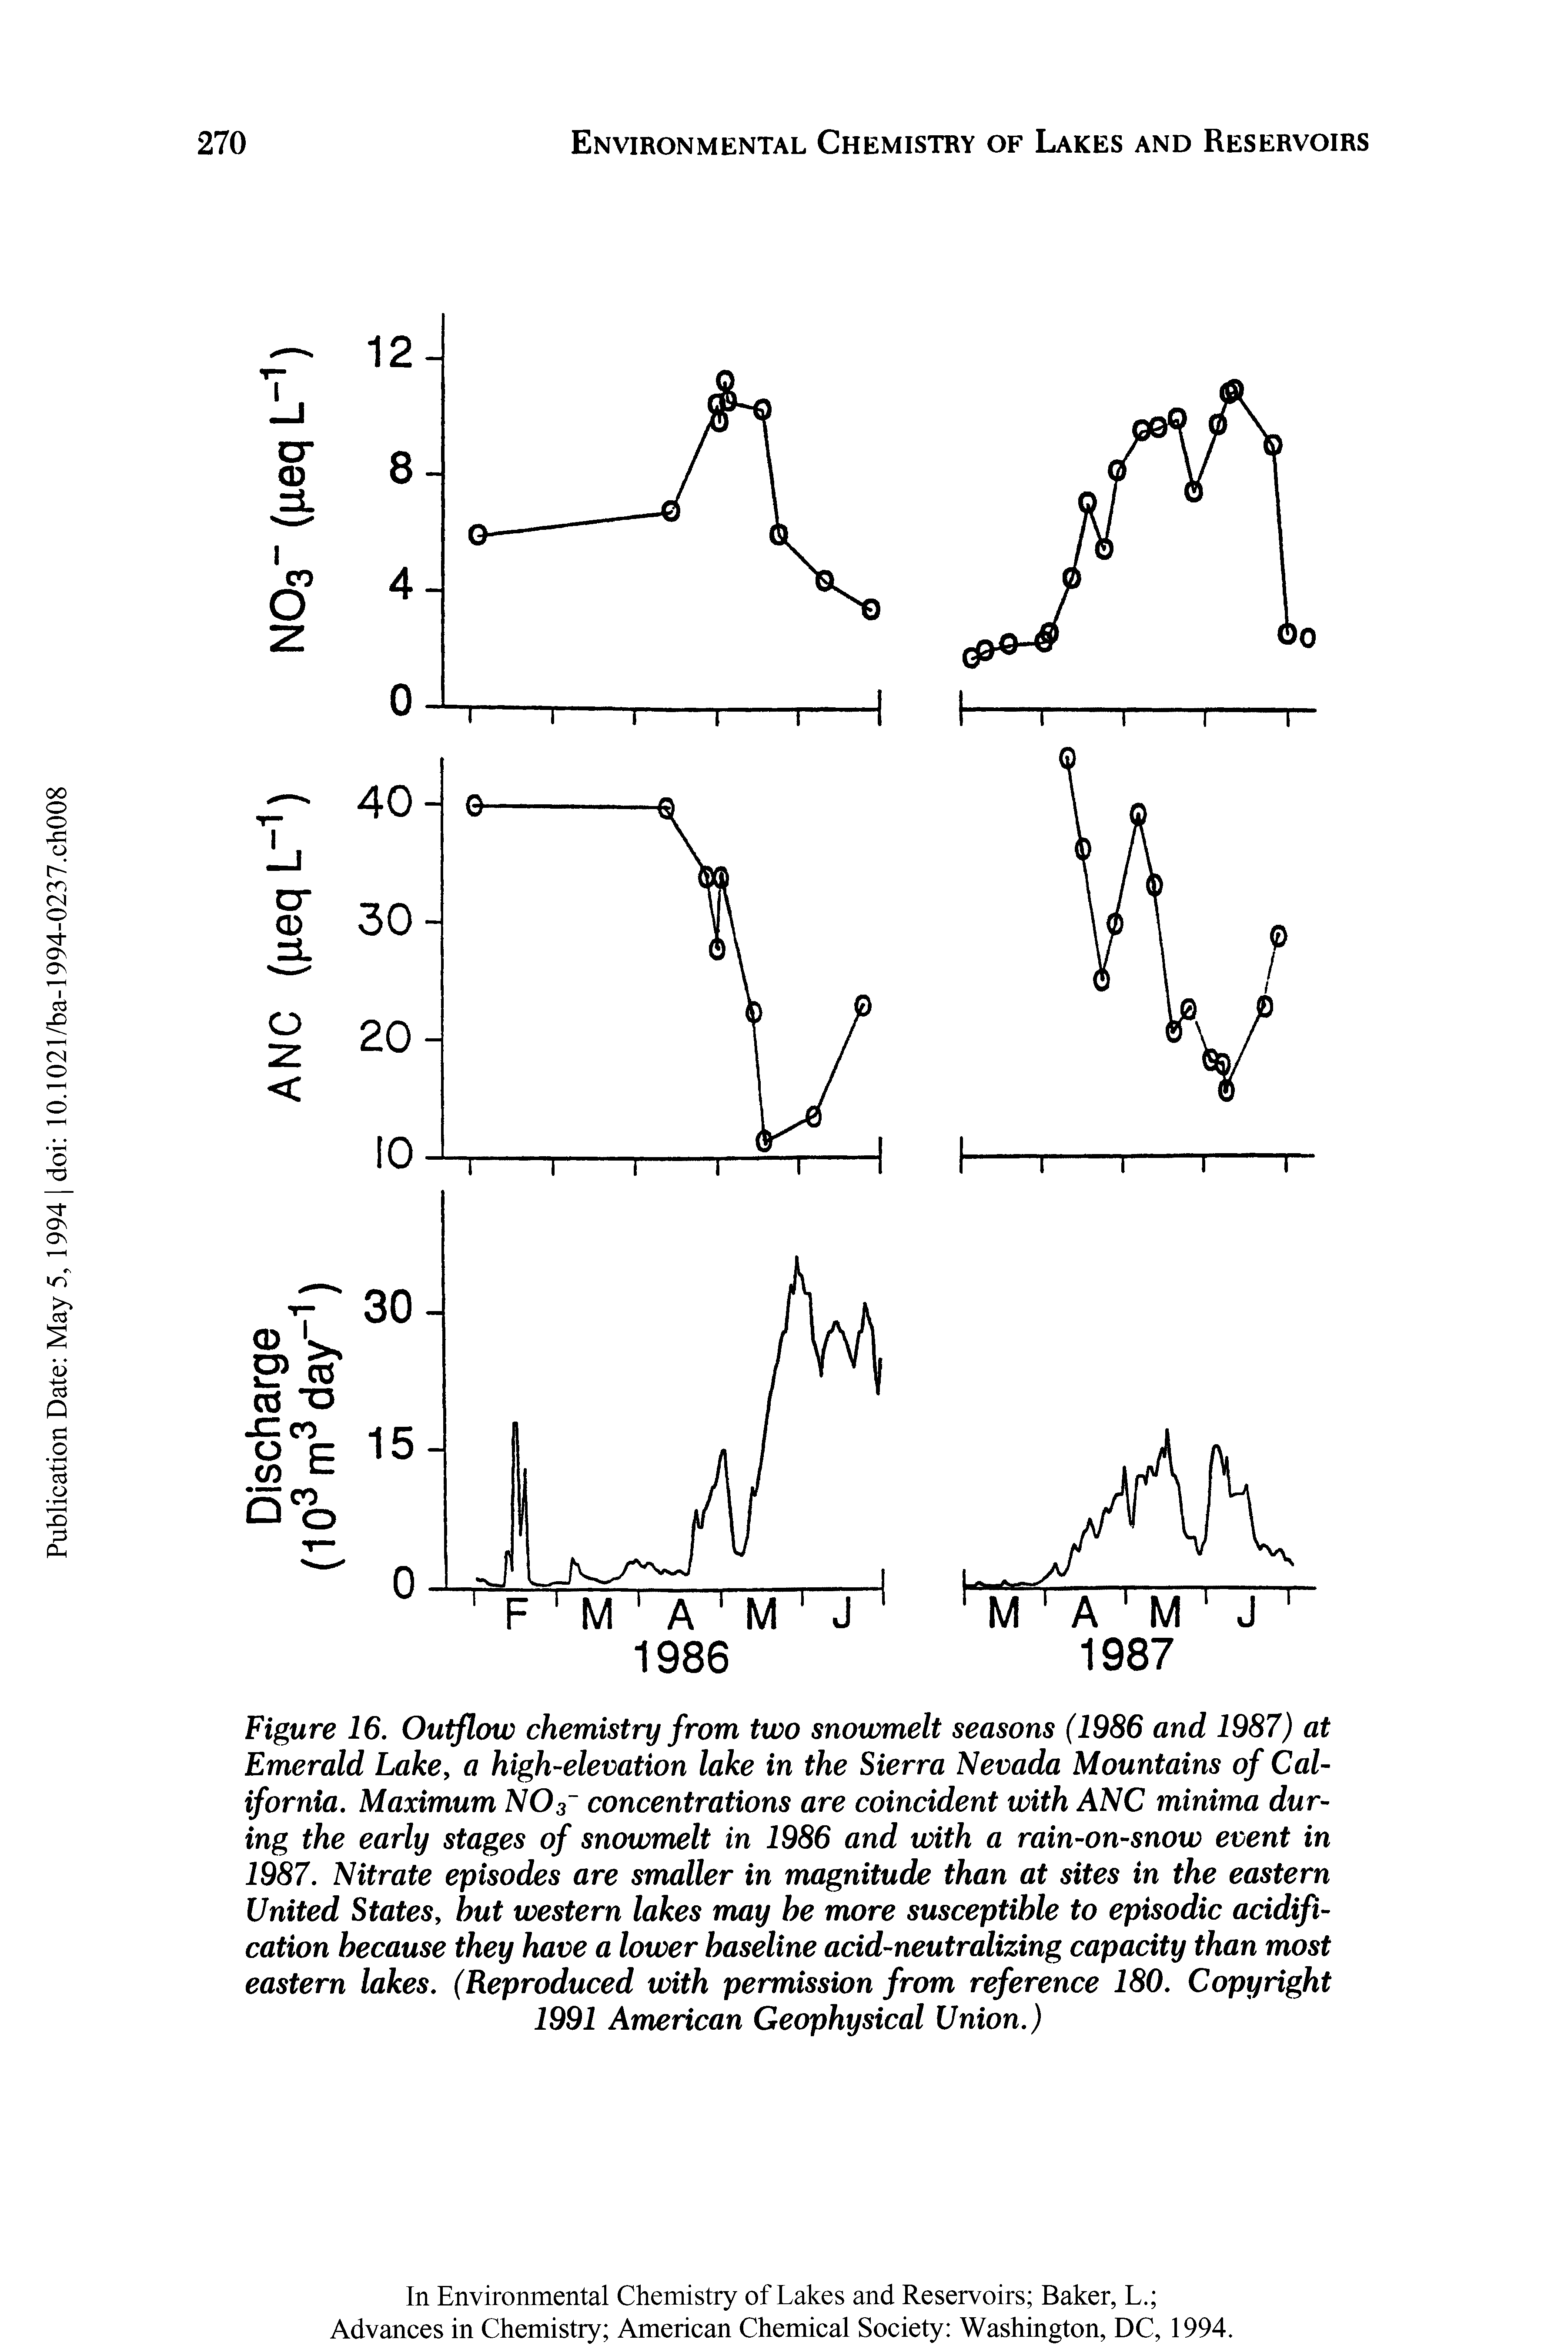 Figure 16. Outflow chemistry from two snowmelt seasons (1986 and 1987) at Emerald Lake, a high-elevation lake in the Sierra Nevada Mountains of California. Maximum N03 concentrations are coincident with ANC minima during the early stages of snowmelt in 1986 and with a rain-on-snow event in 1987. Nitrate episodes are smaller in magnitude than at sites in the eastern United States, hut western lakes may he more susceptible to episodic acidification because they have a lower baseline acid-neutralizing capacity than most eastern lakes. (Reproduced with permission from reference 180. Copyright 1991 American Geophysical Union.)...